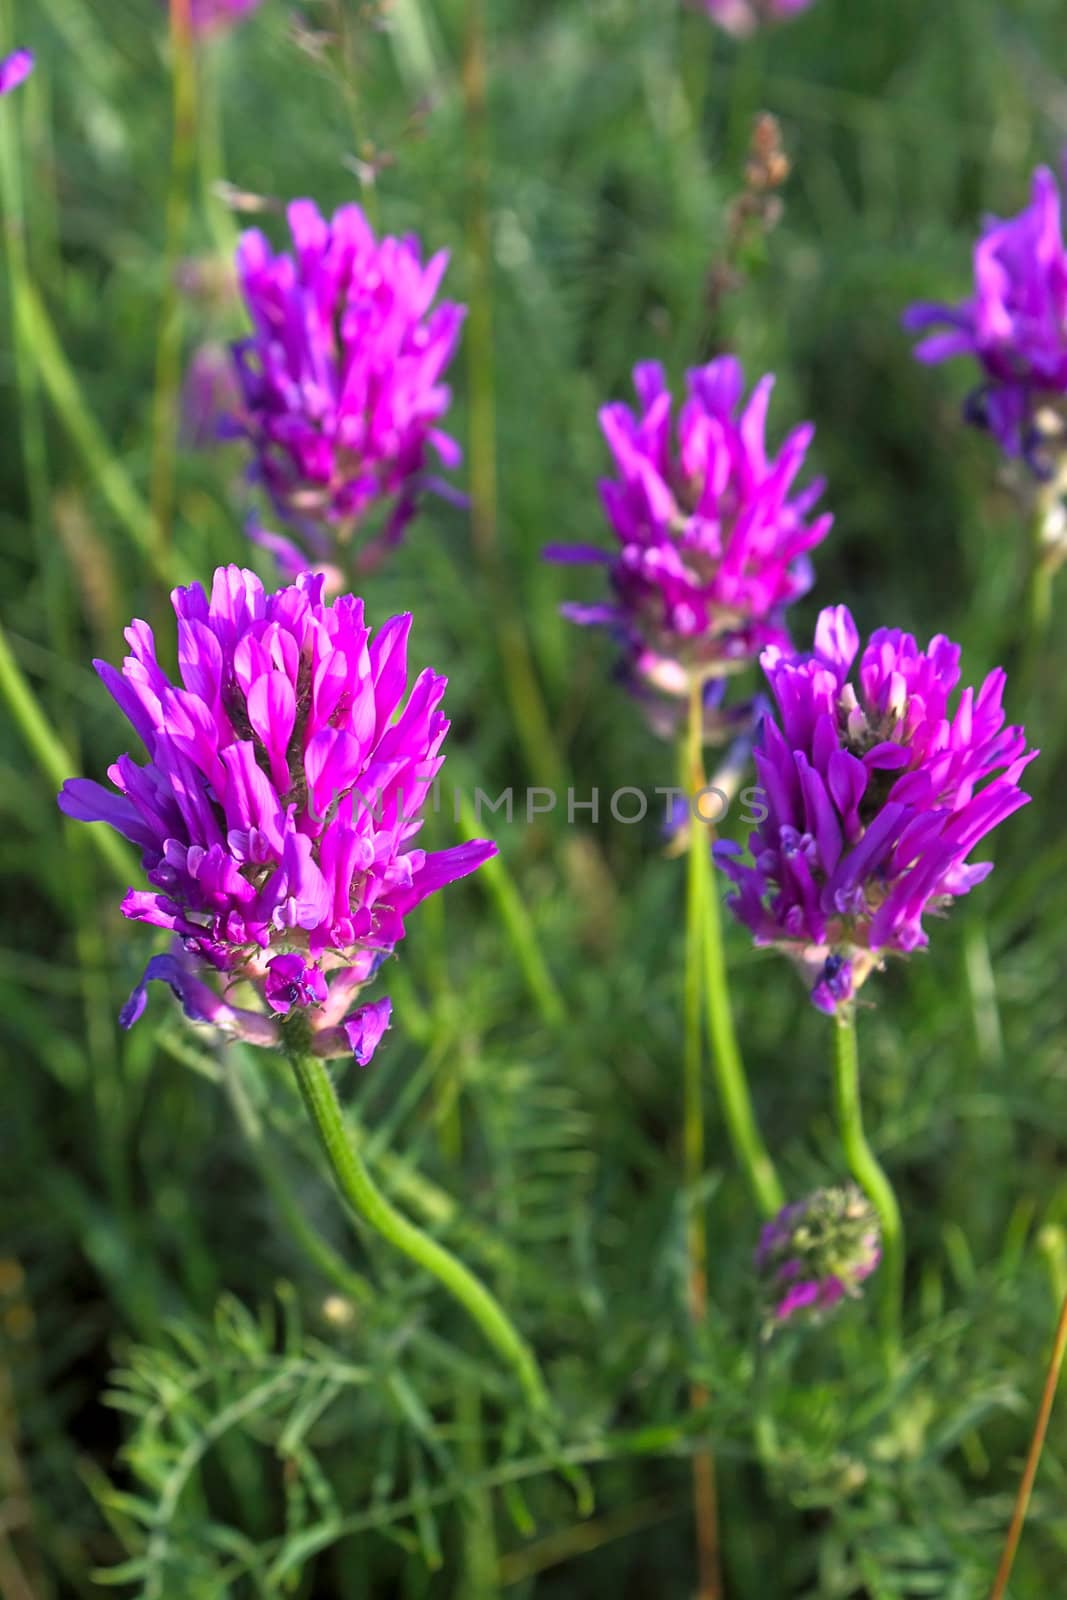 Purple clover flowers on  background of grass. An image with shallow depth of field.